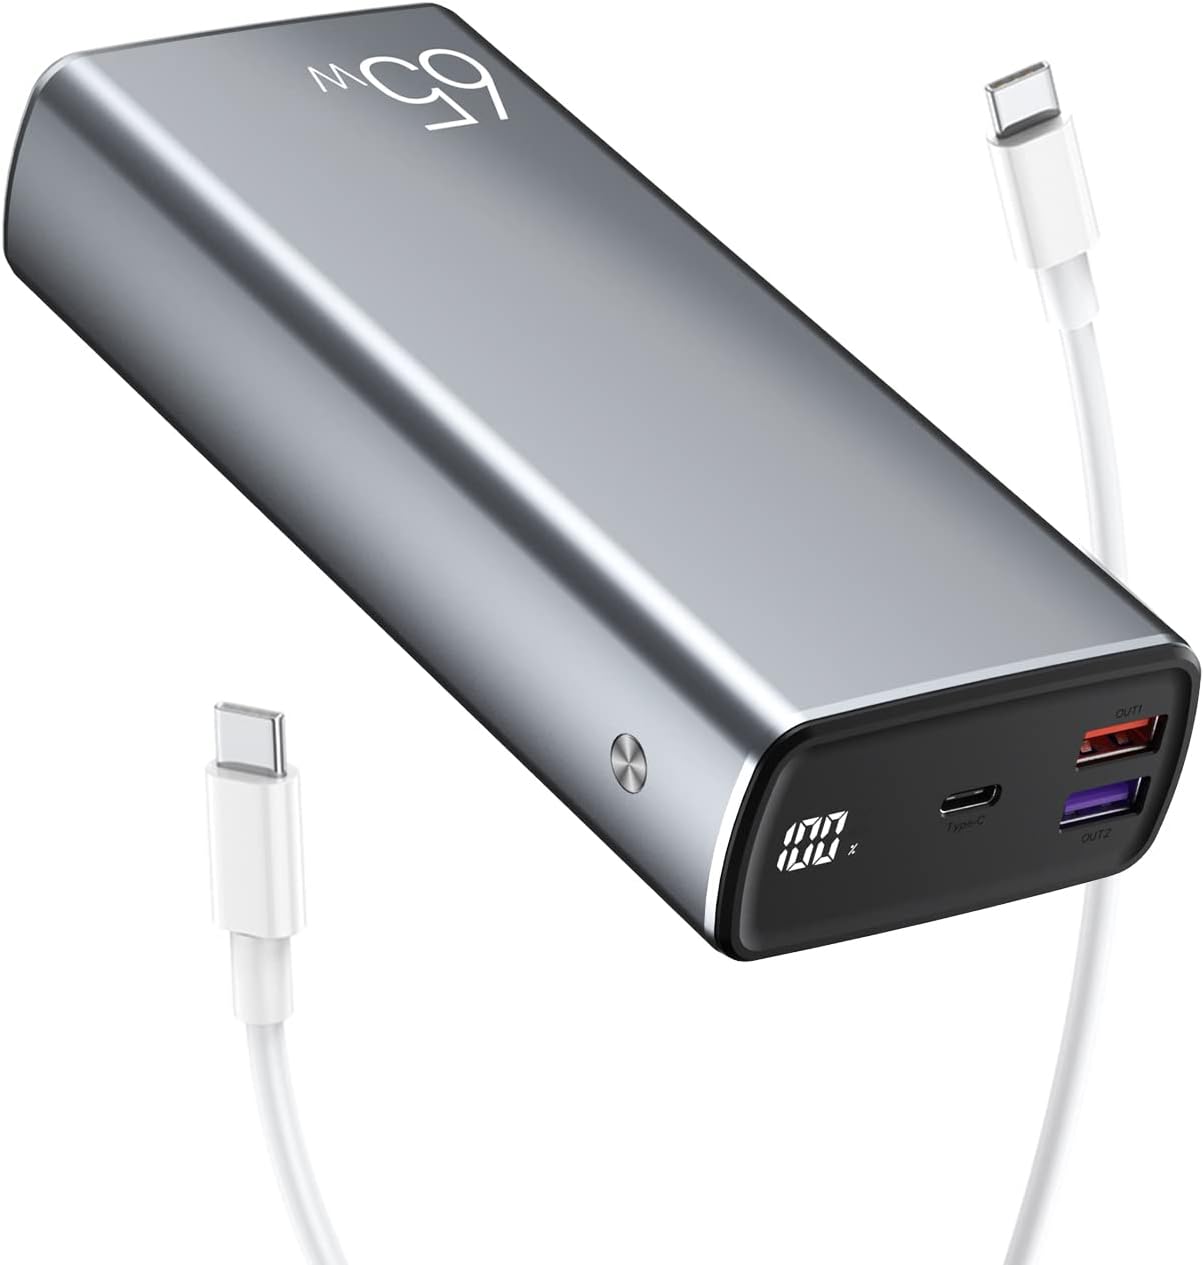 Portable Laptop Charger USB Power Bank  Portable Laptop Charger, PD 65W 30000mAh Power Bank USB C Fast Charging 3-Ports External Battery Pack Portable Charger Compatible with MacBook, , iPad, Tablets, iPhone, Galaxy, Android - UNIVERSAL COMPATIBILITY